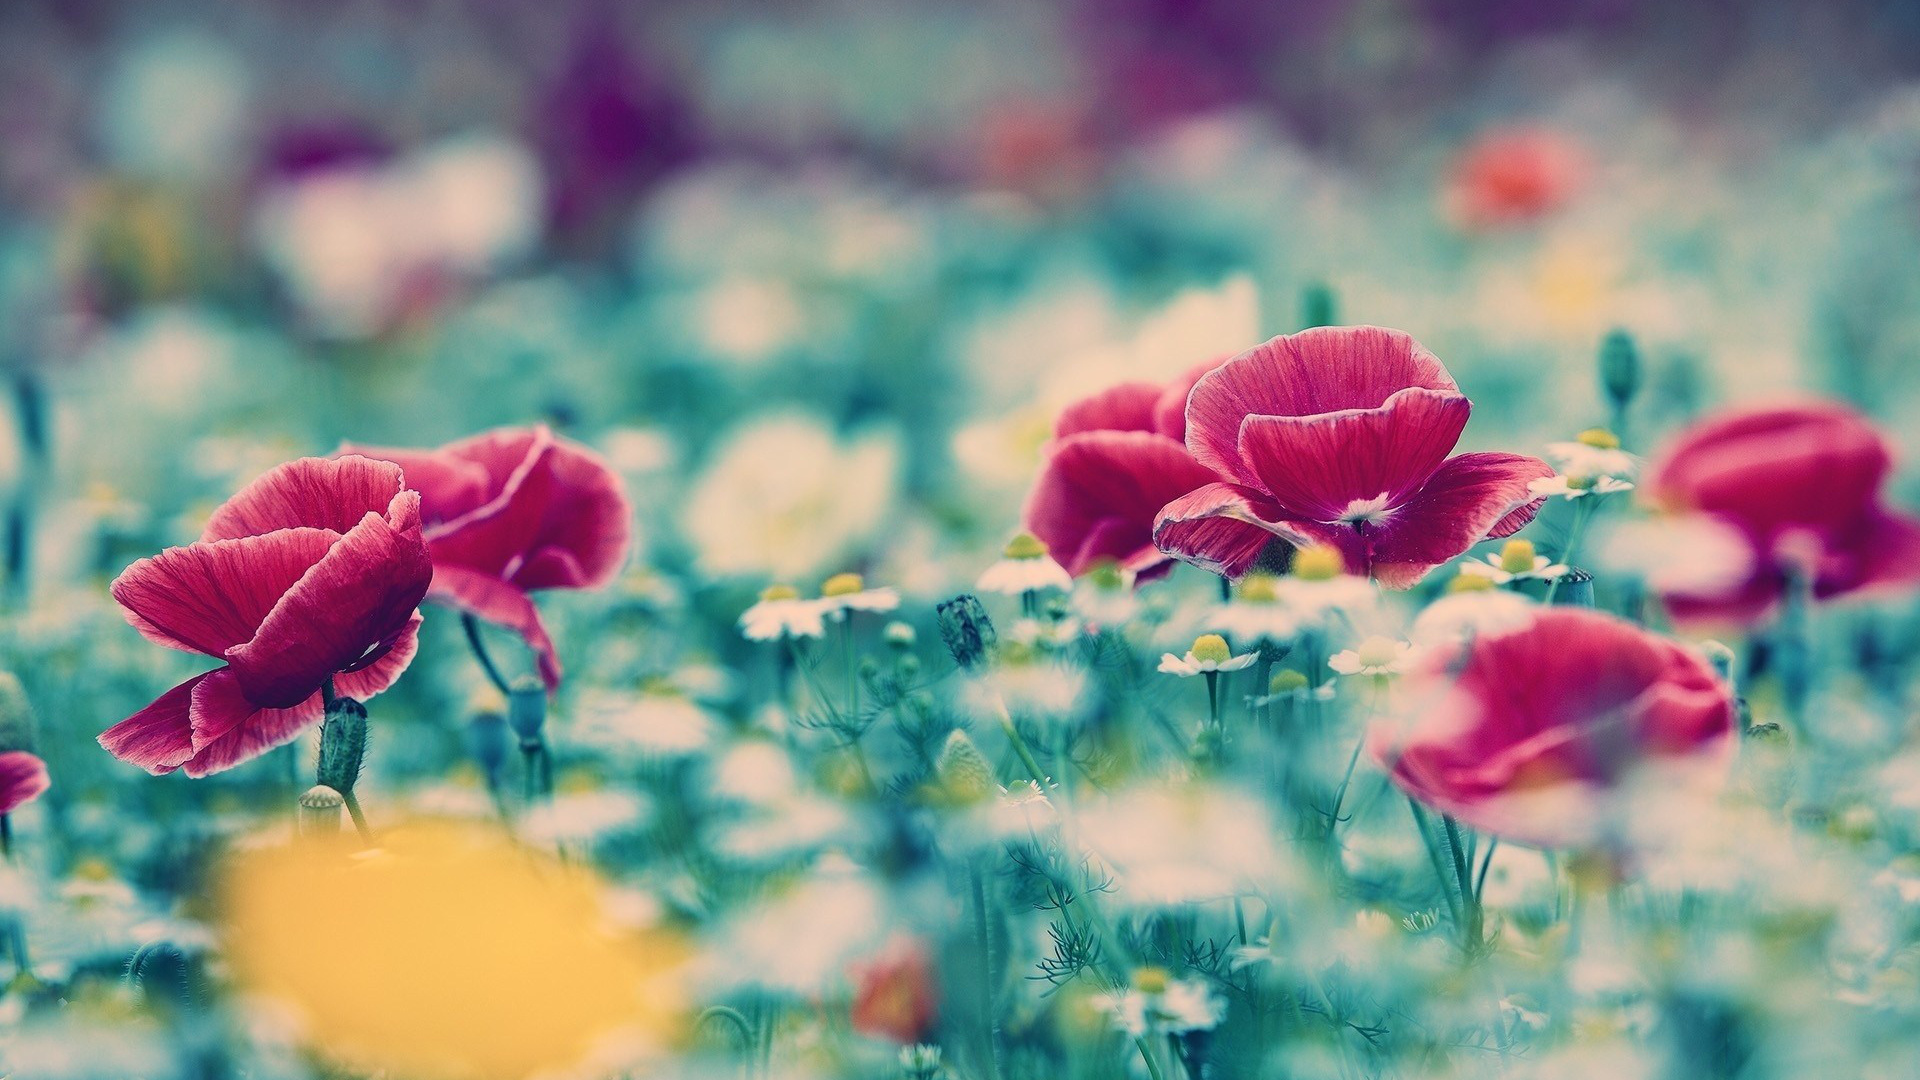 Red Poppy Flowers in Bloom During Daytime. Wallpaper in 1920x1080 Resolution